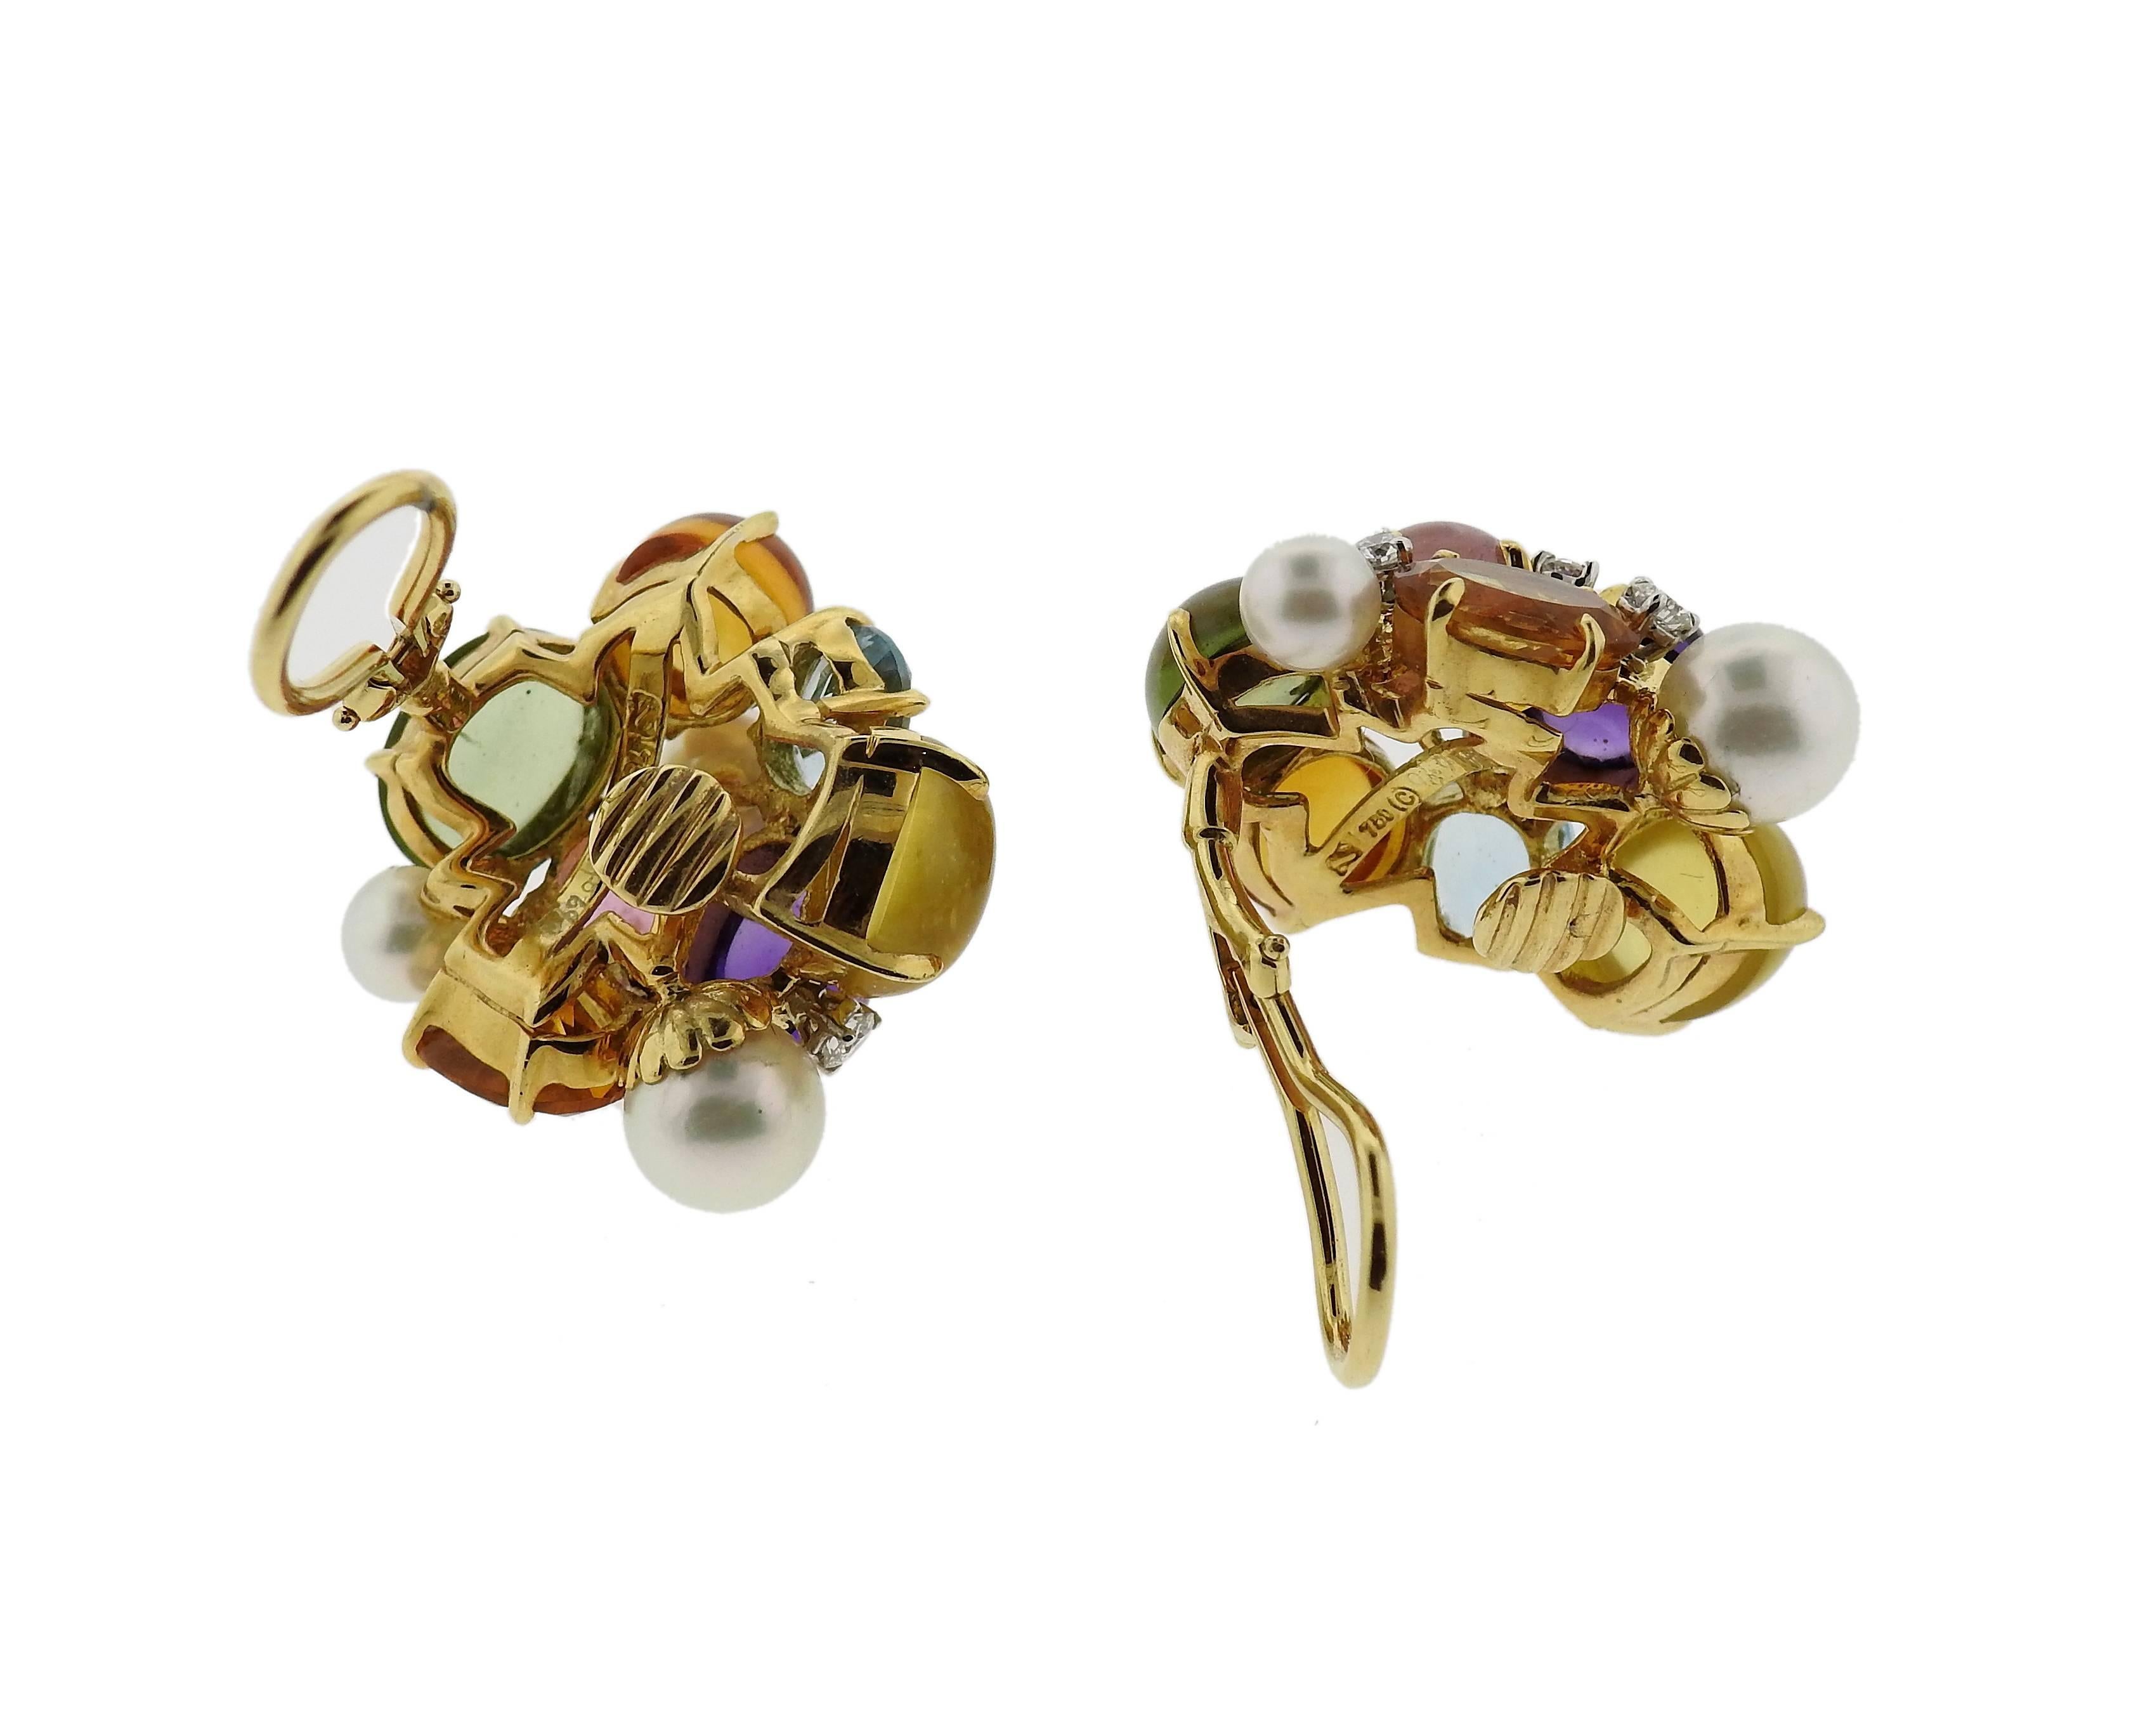 A pair of large 18k yellow gold earrings, crafted by Seaman Schepps, decorated with multi color gemstones and diamonds - Diamonds 0.72ctw, Pearls, Amethysts 5.72ctw, Aquamarines 2.36ctw, Citrines 8.12ctw, Green Tourmalines 6.30ctw, Pink Tourmalines